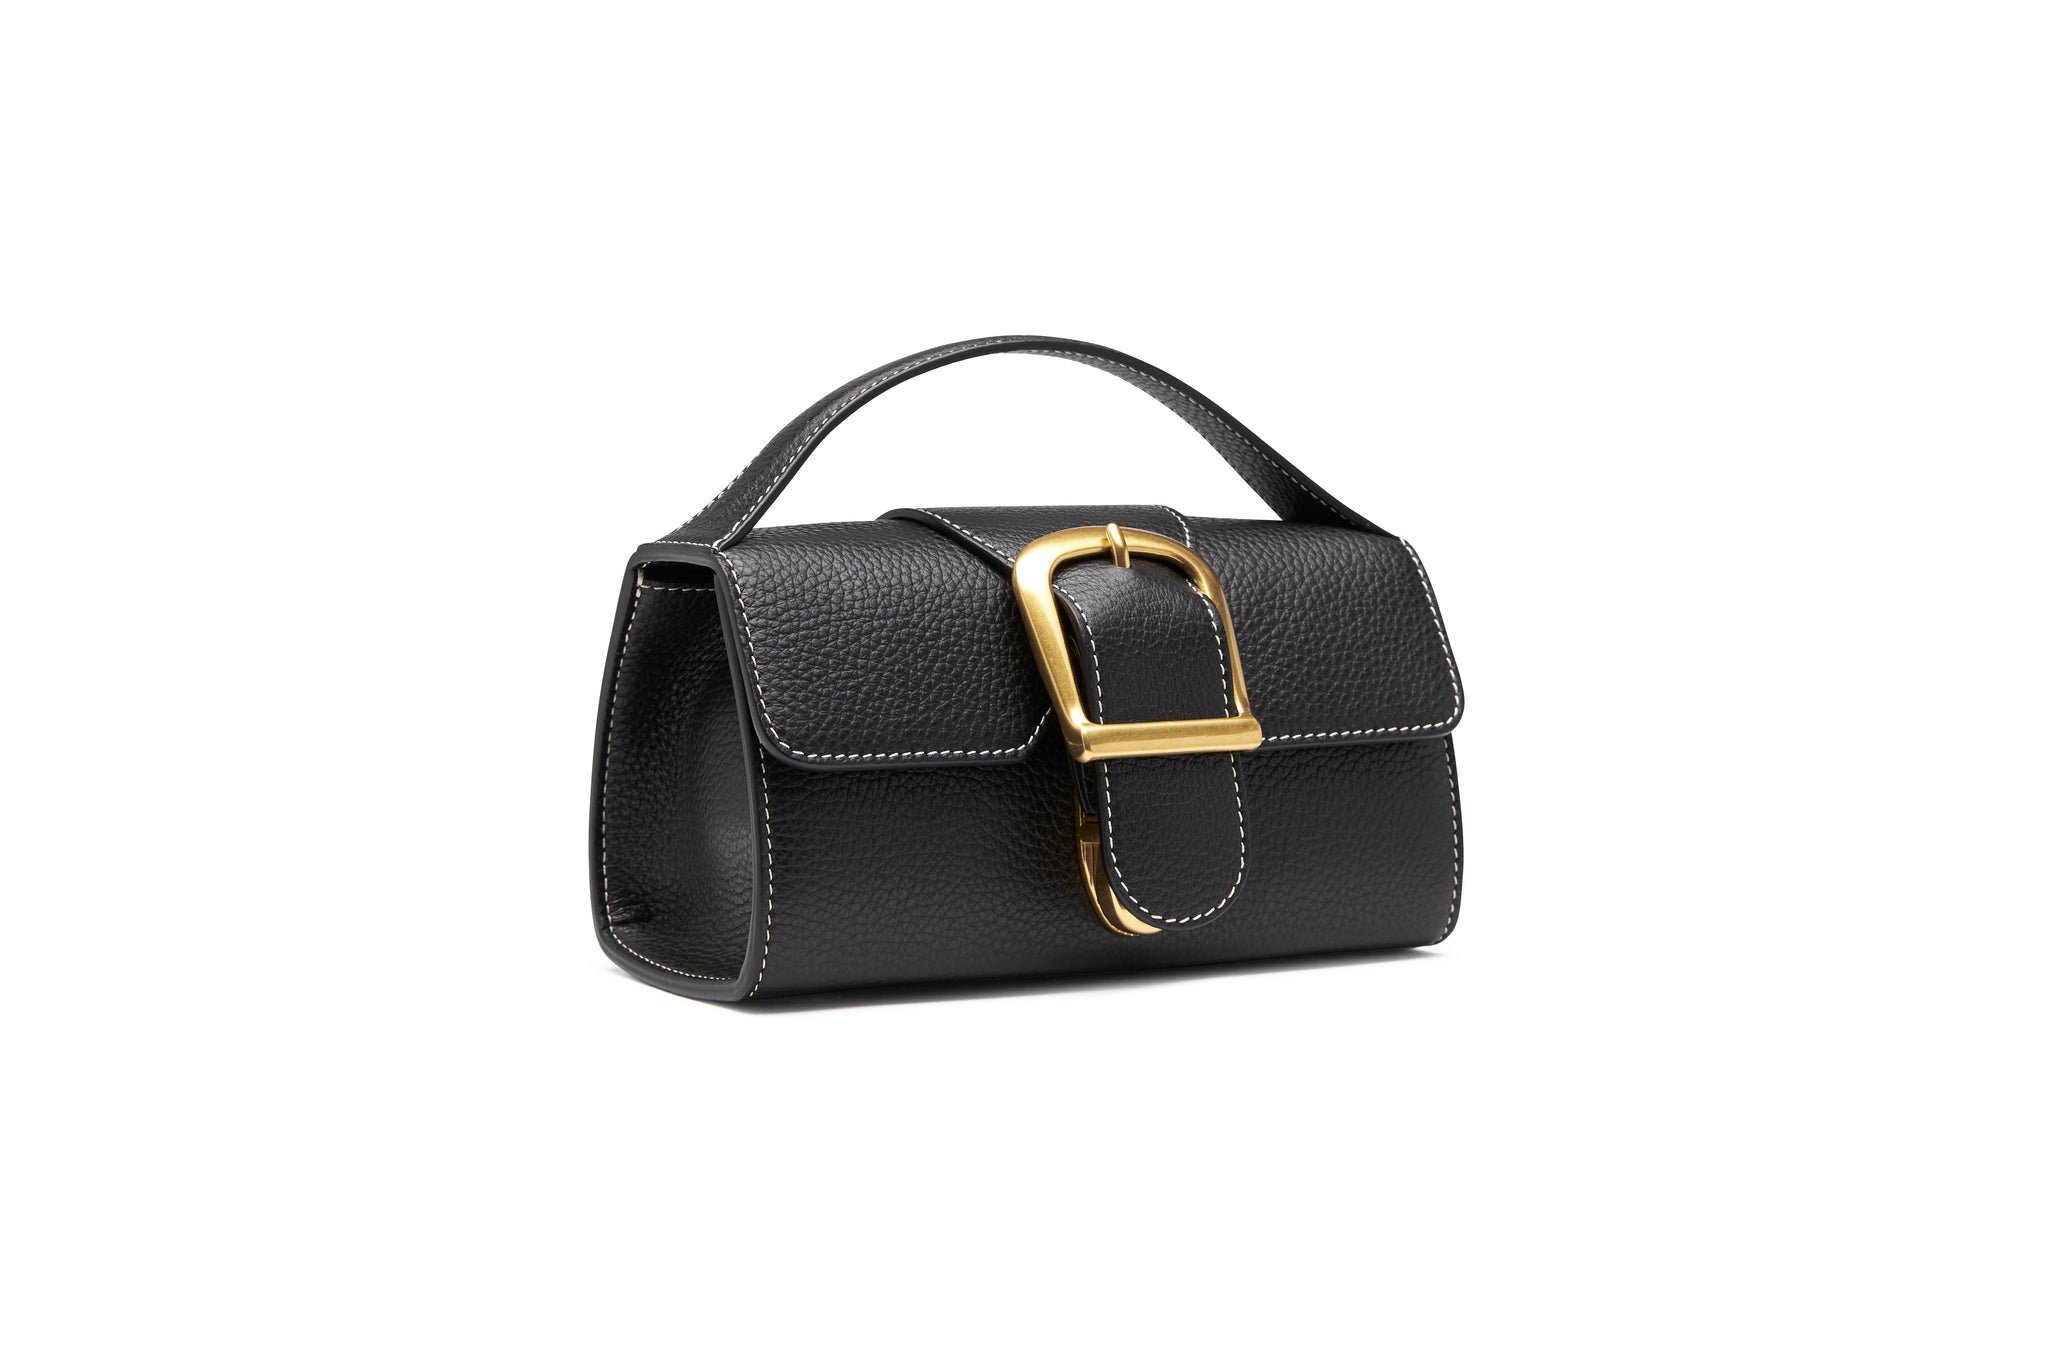 Rylan, Rylan Studio, Black with Ivory Stitch Soft Grained Mini Satchel with Flat Handle, Made in Italy